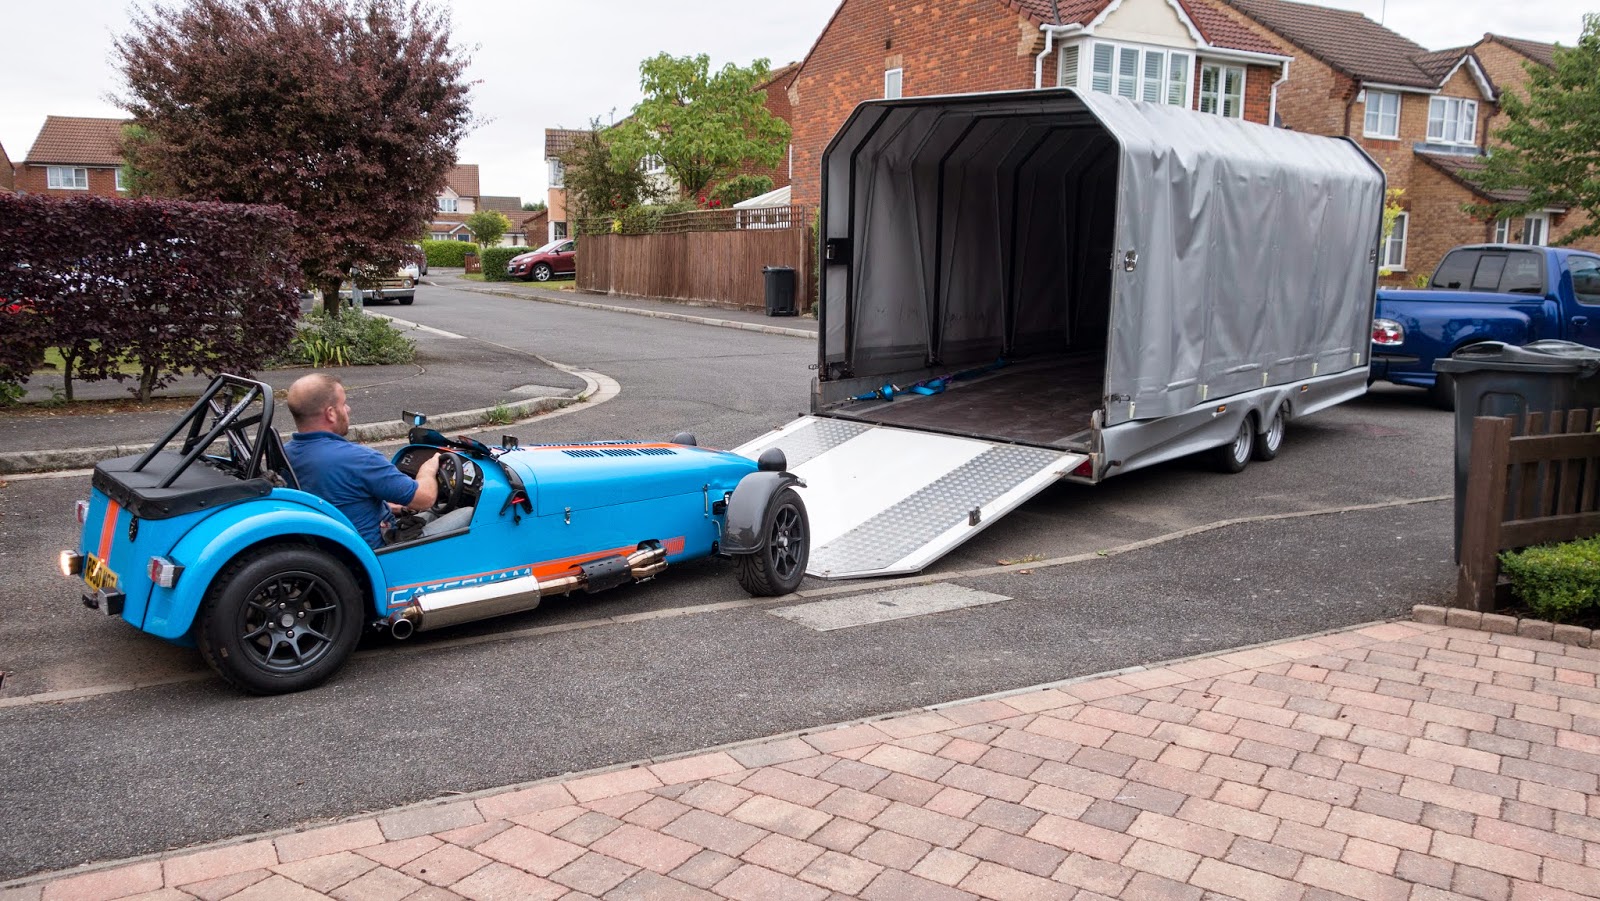 My Caterham R500 being unloaded after it's first service.